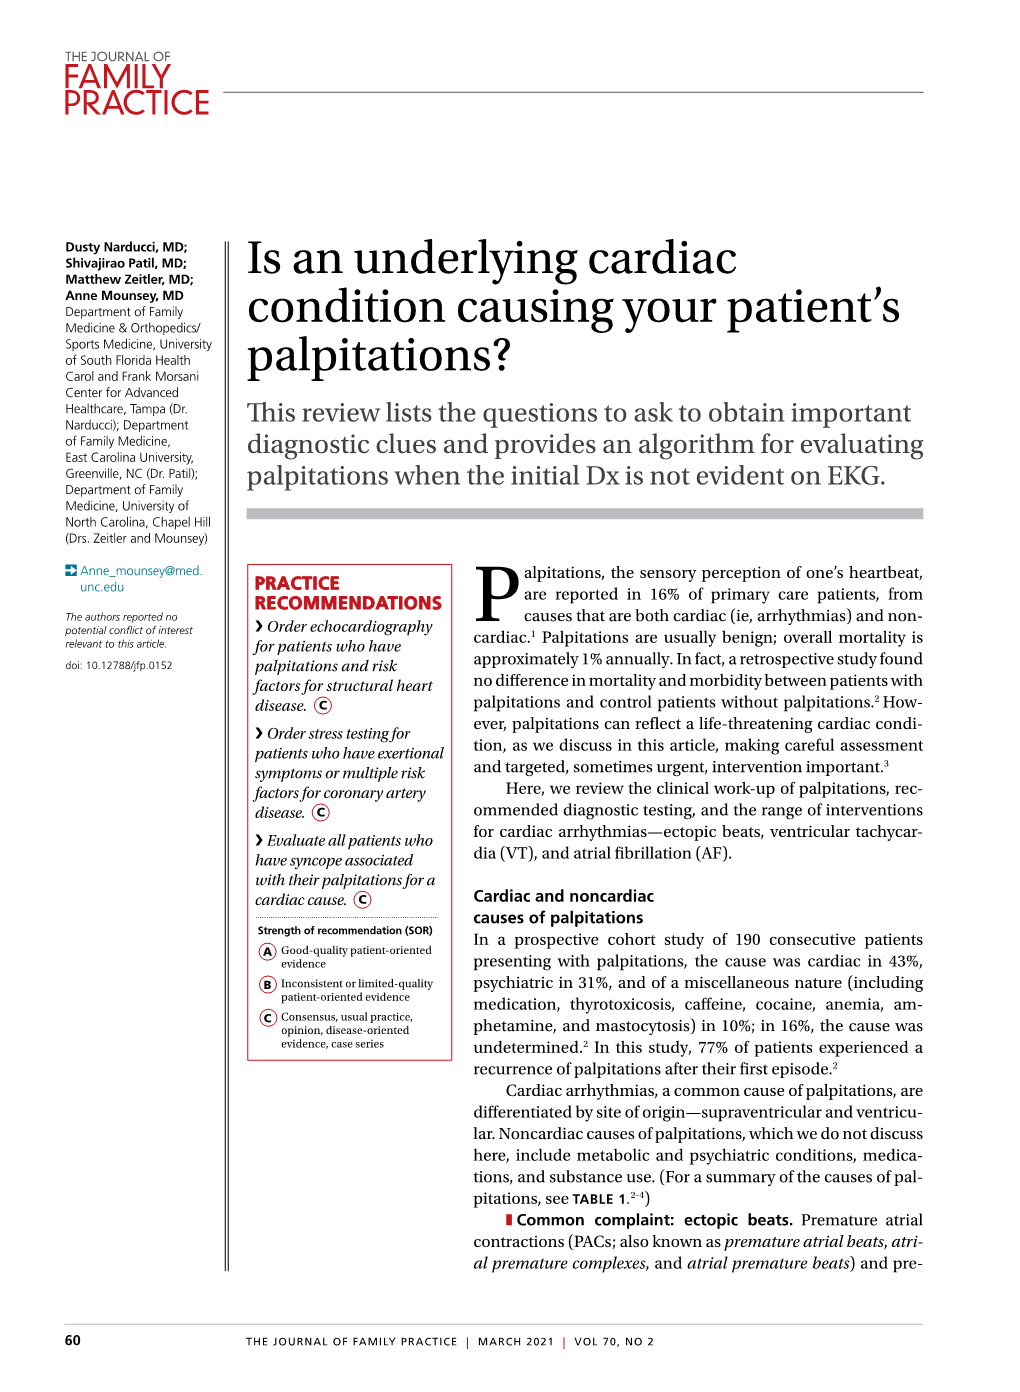 Is an Underlying Cardiac Condition Causing Your Patient's Palpitations?